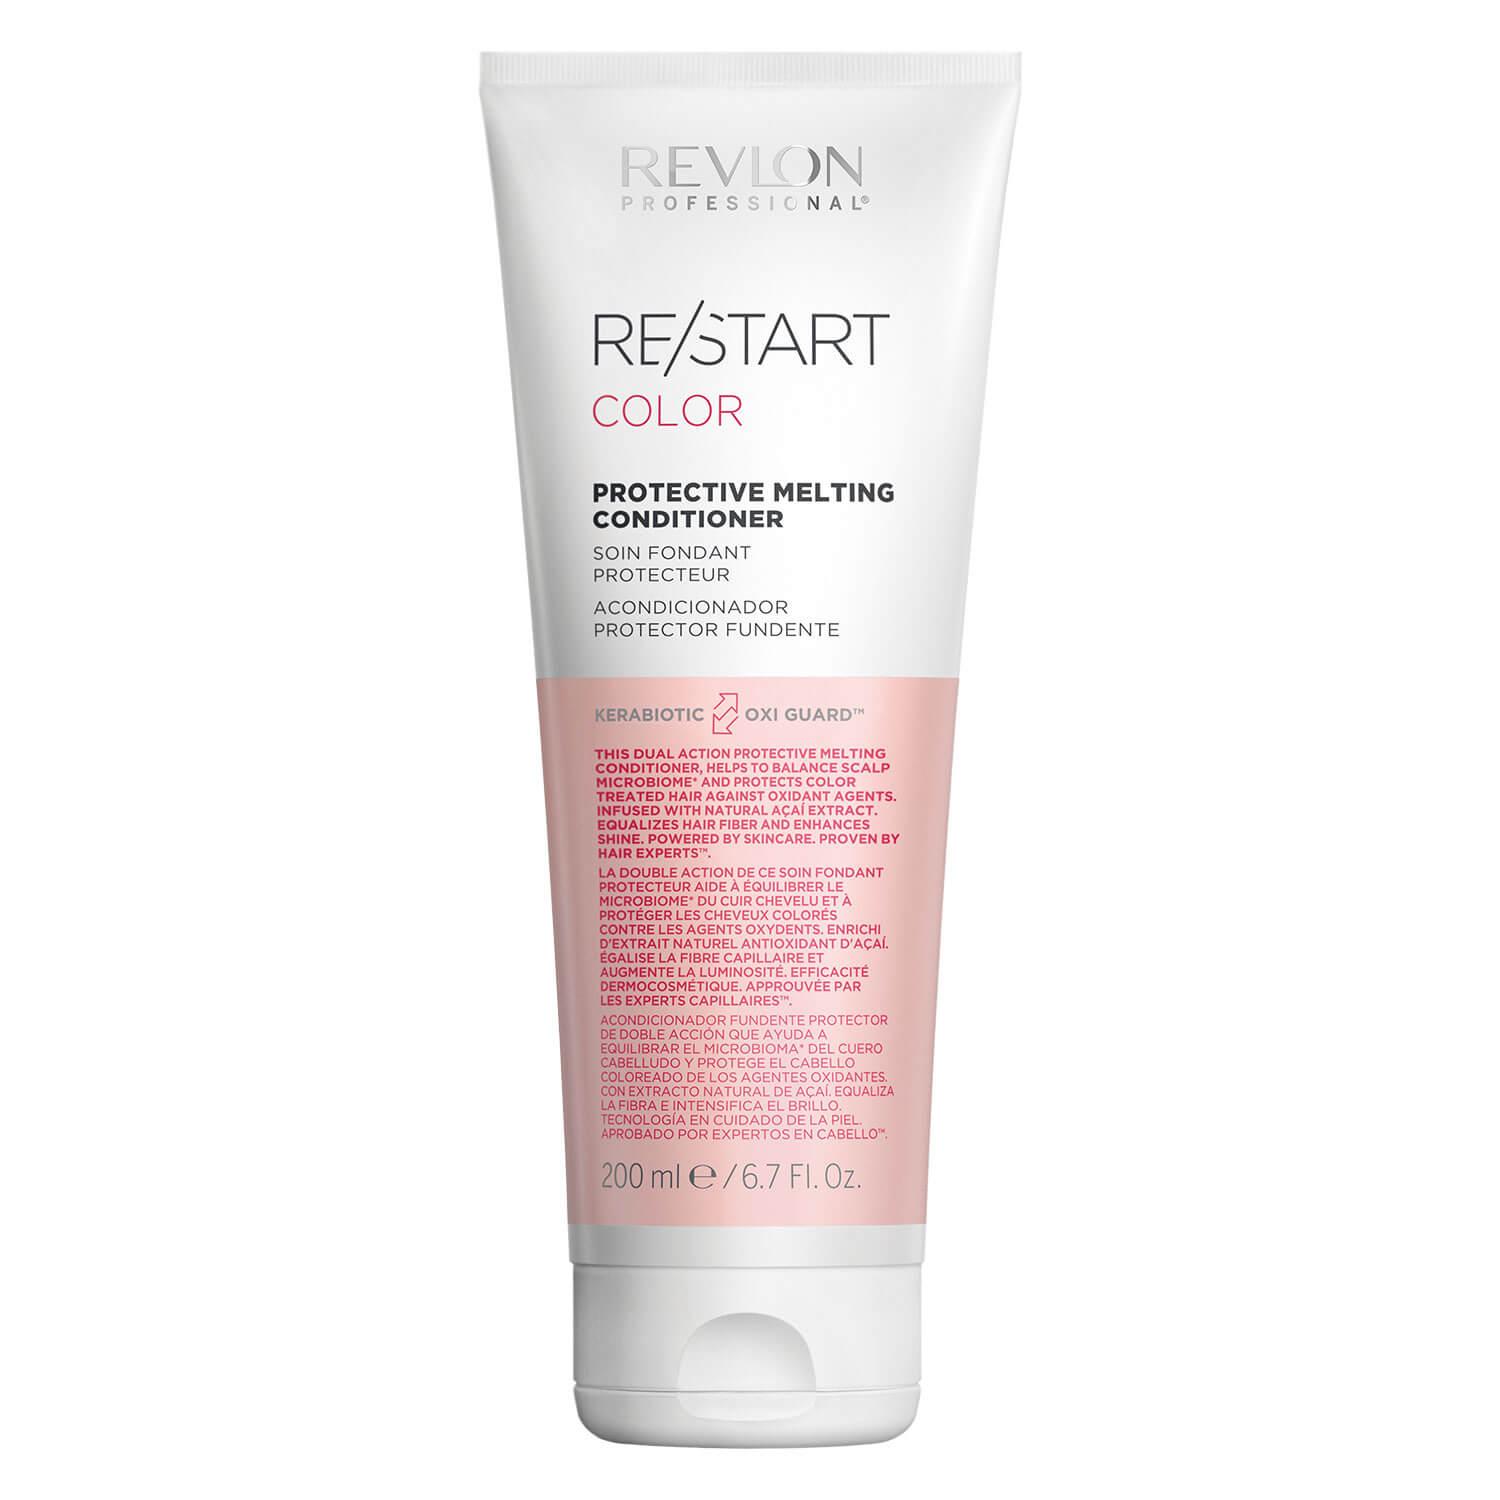 RE/START COLOR - Protective Melting Conditioner